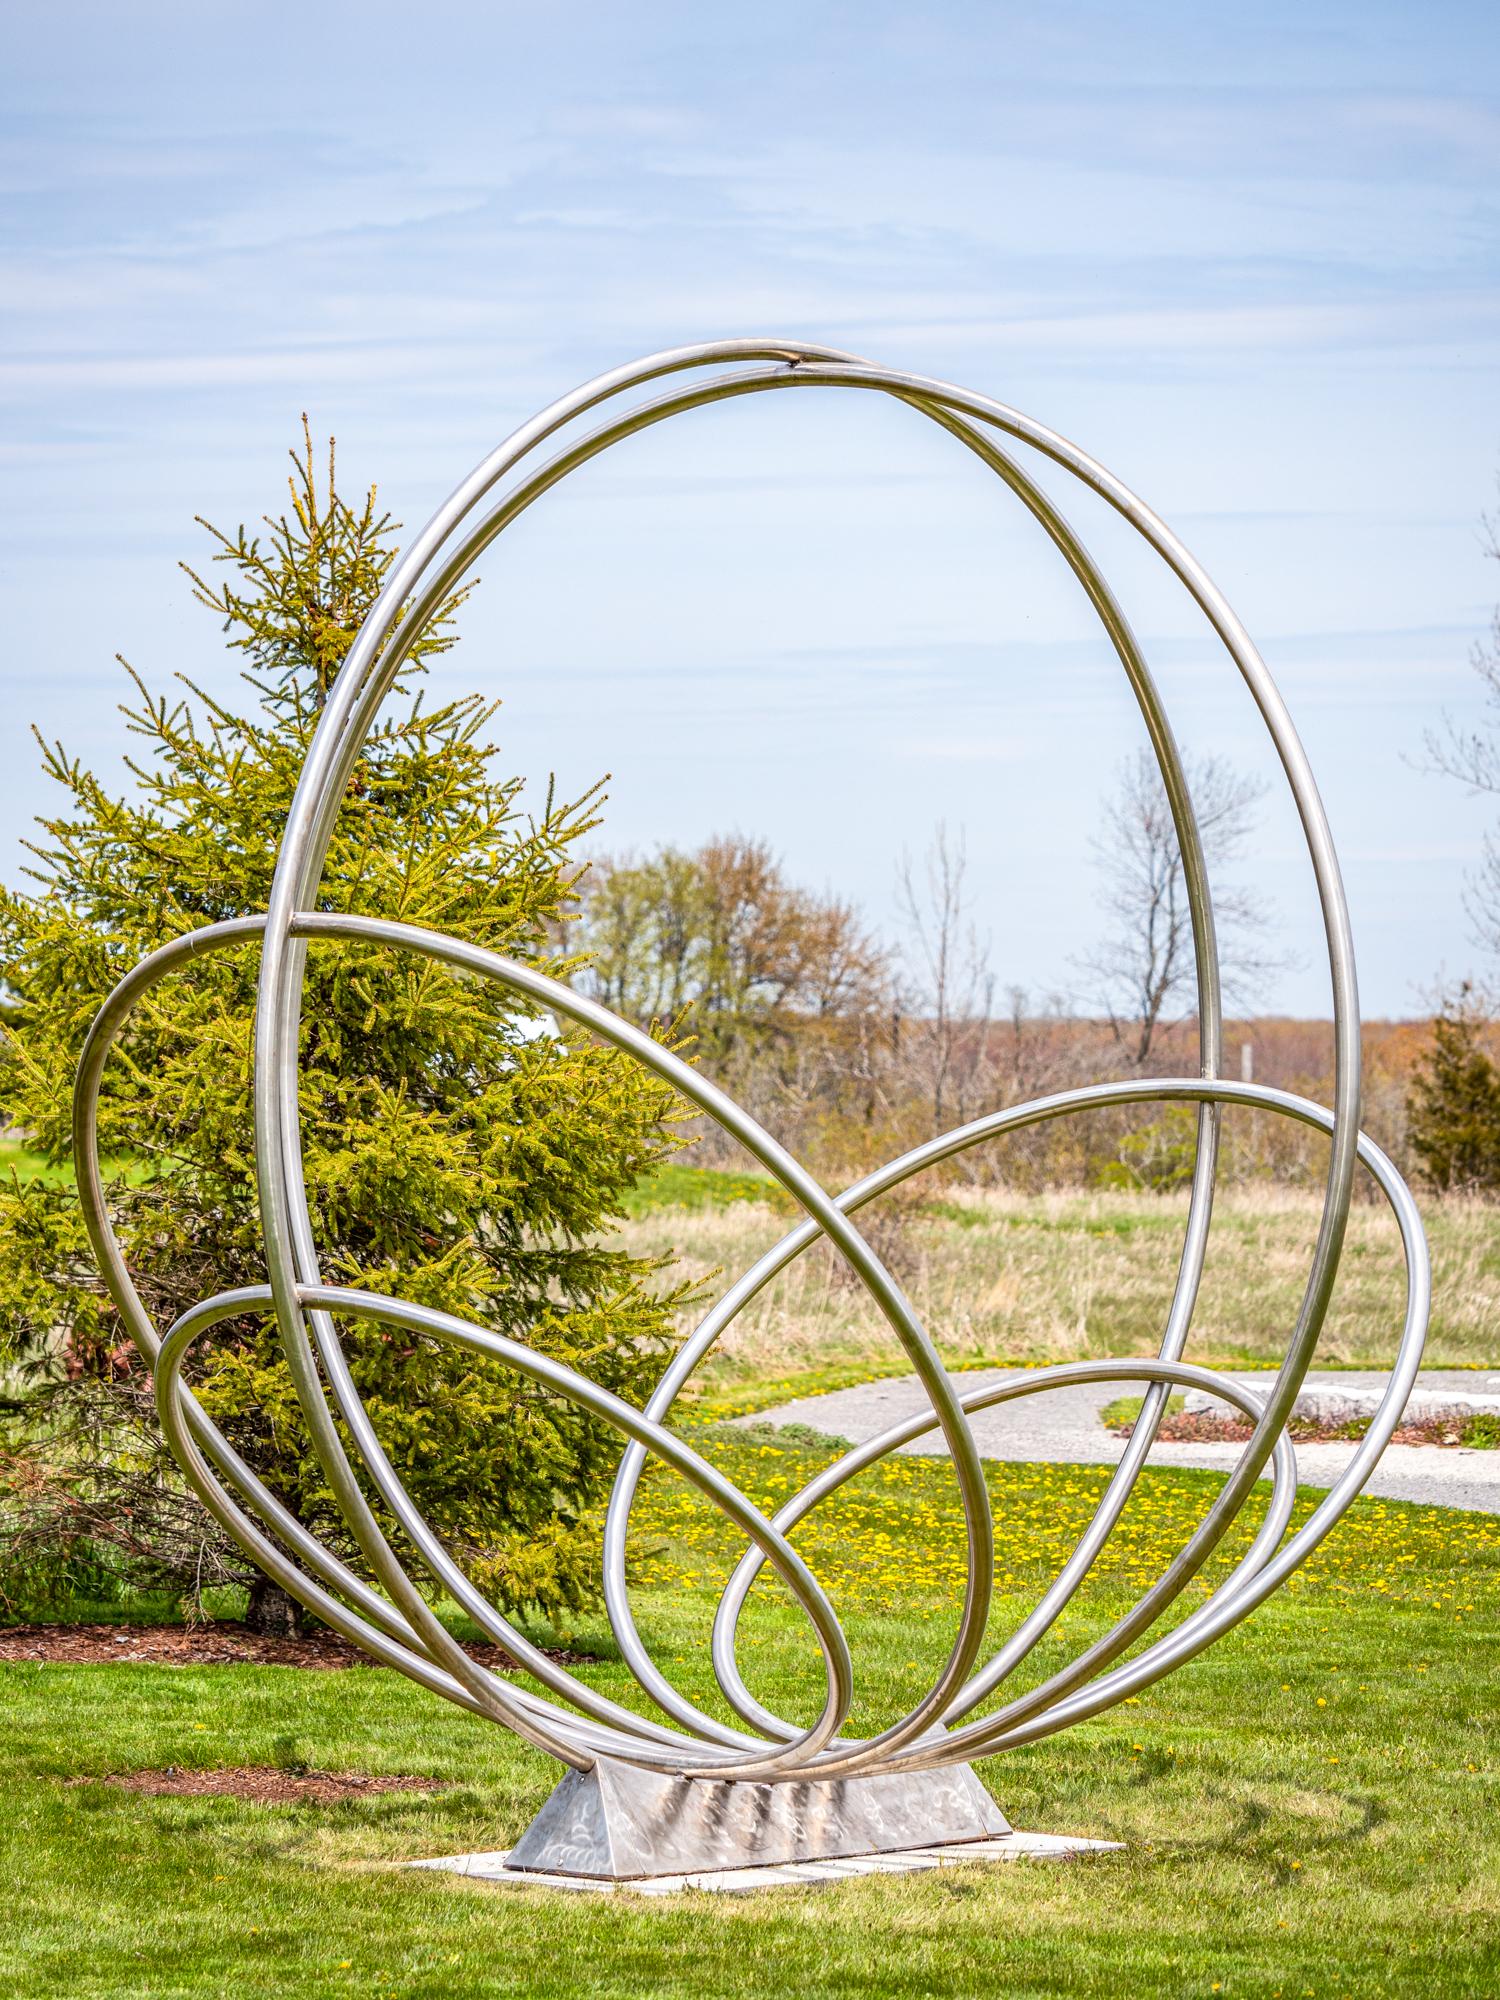 Six Rings - large, symmetric, abstract, rings, stainless steel outdoor sculpture - Contemporary Sculpture by Jake Goertzen